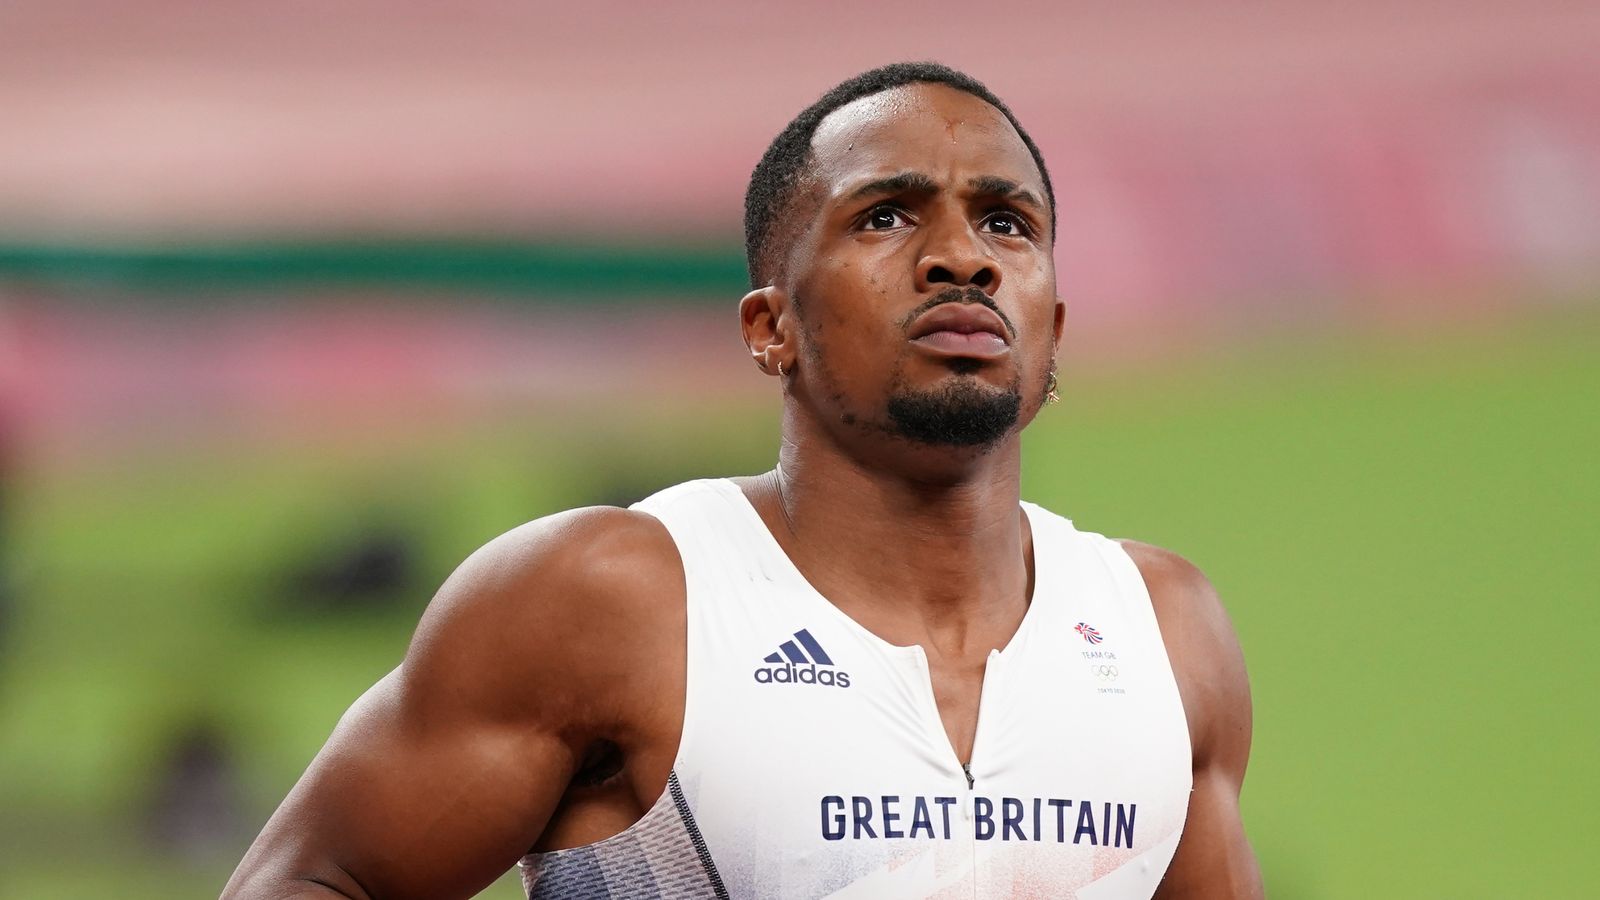 CJ Ujah: Second sample of British Olympic sprinter positive for banned substances